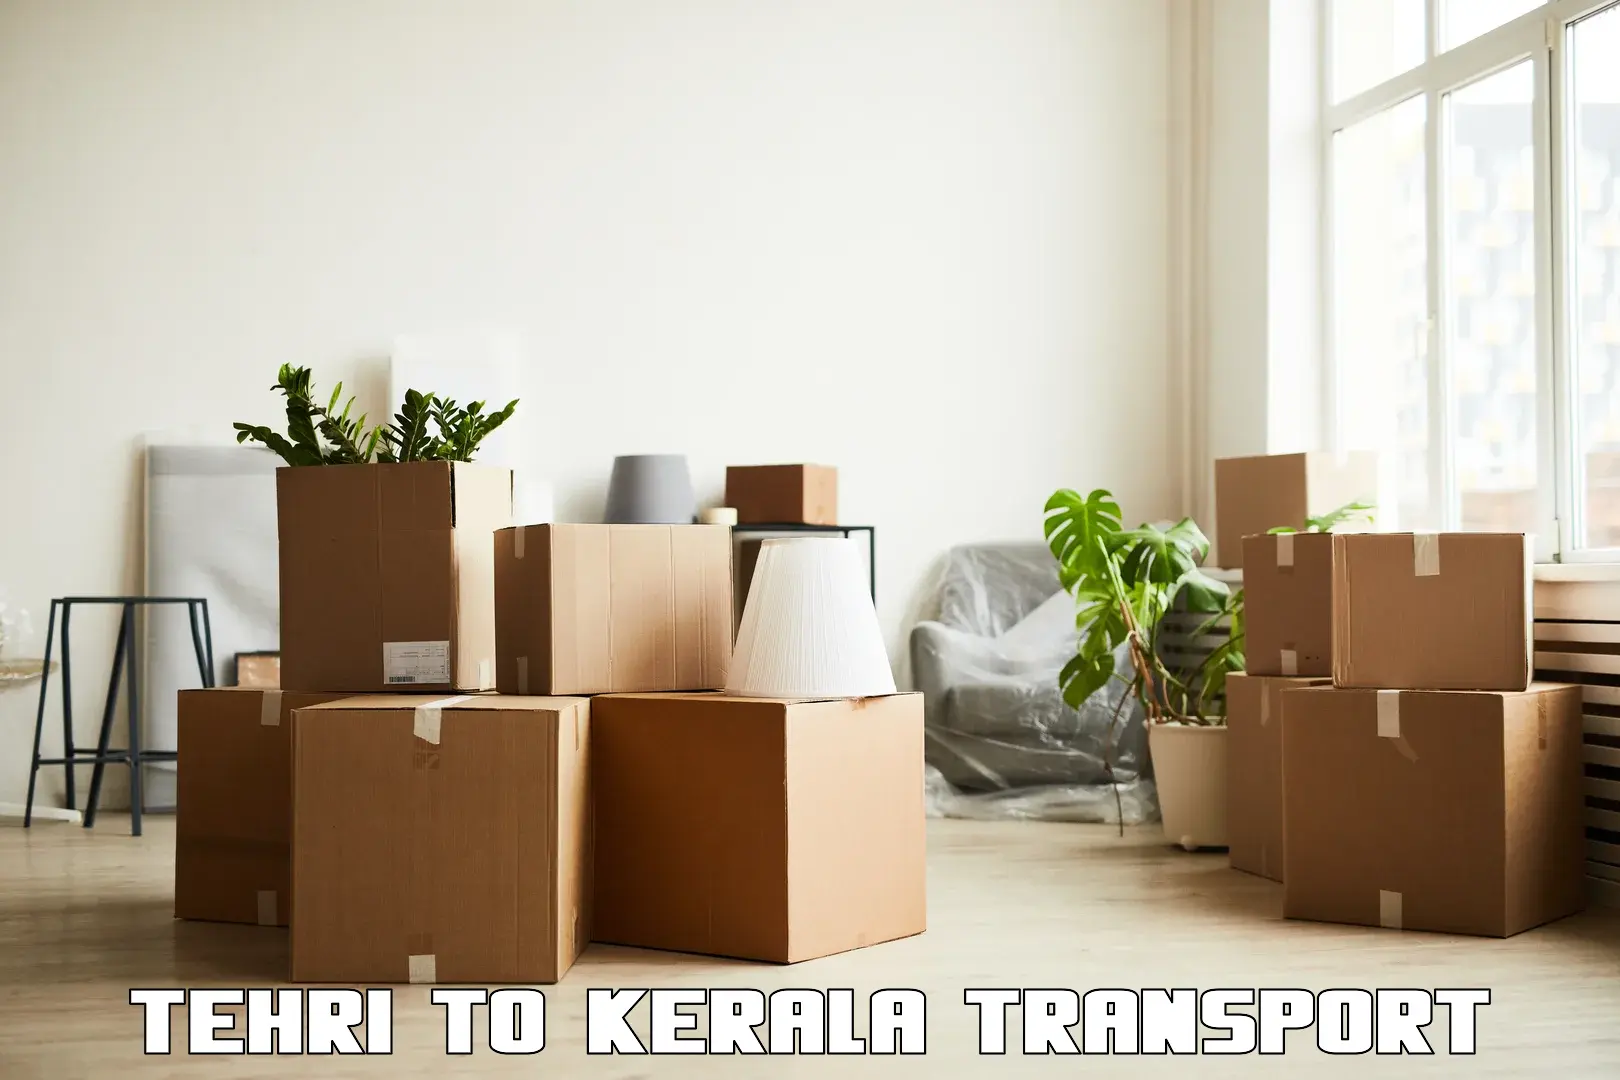 Nearby transport service Tehri to Kerala